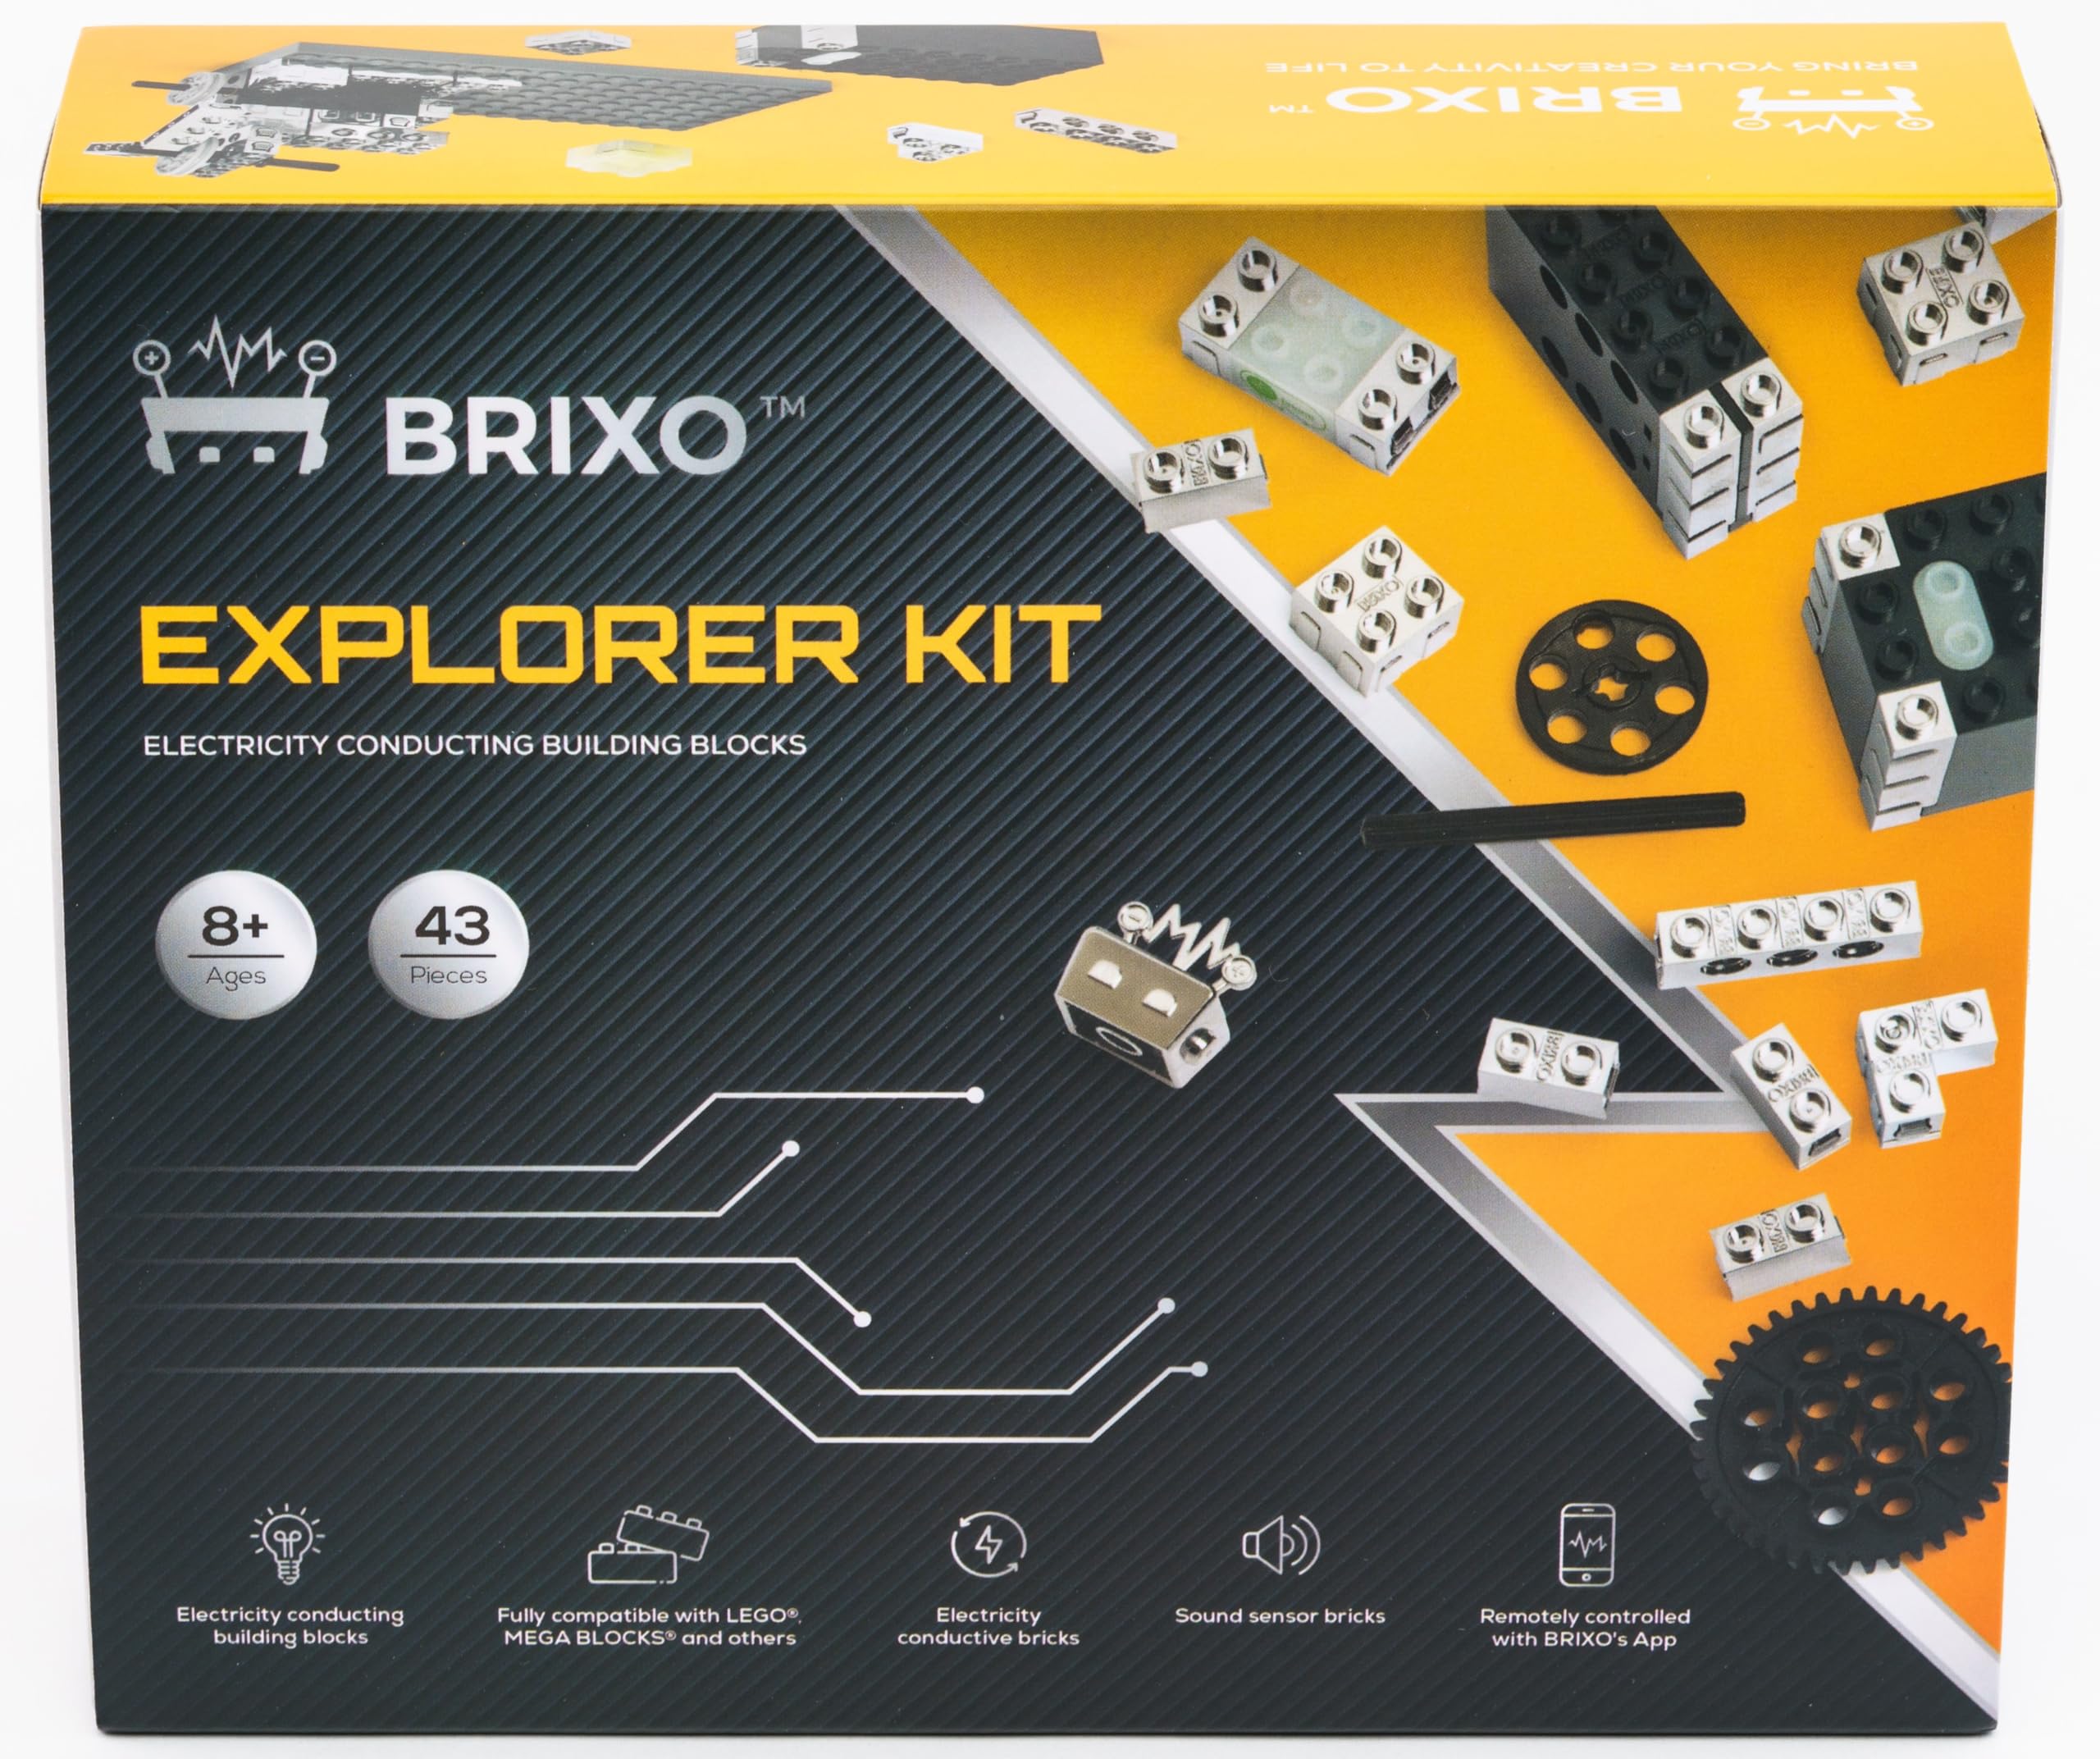 Dakott Explorer-KIT, Electricity conducting Building Blocks, Fully Compatible with All LegoBricks and Models. Meet BRIXO - A New World of Creativity and Innovation. Bring Your LegoBricks to Life.